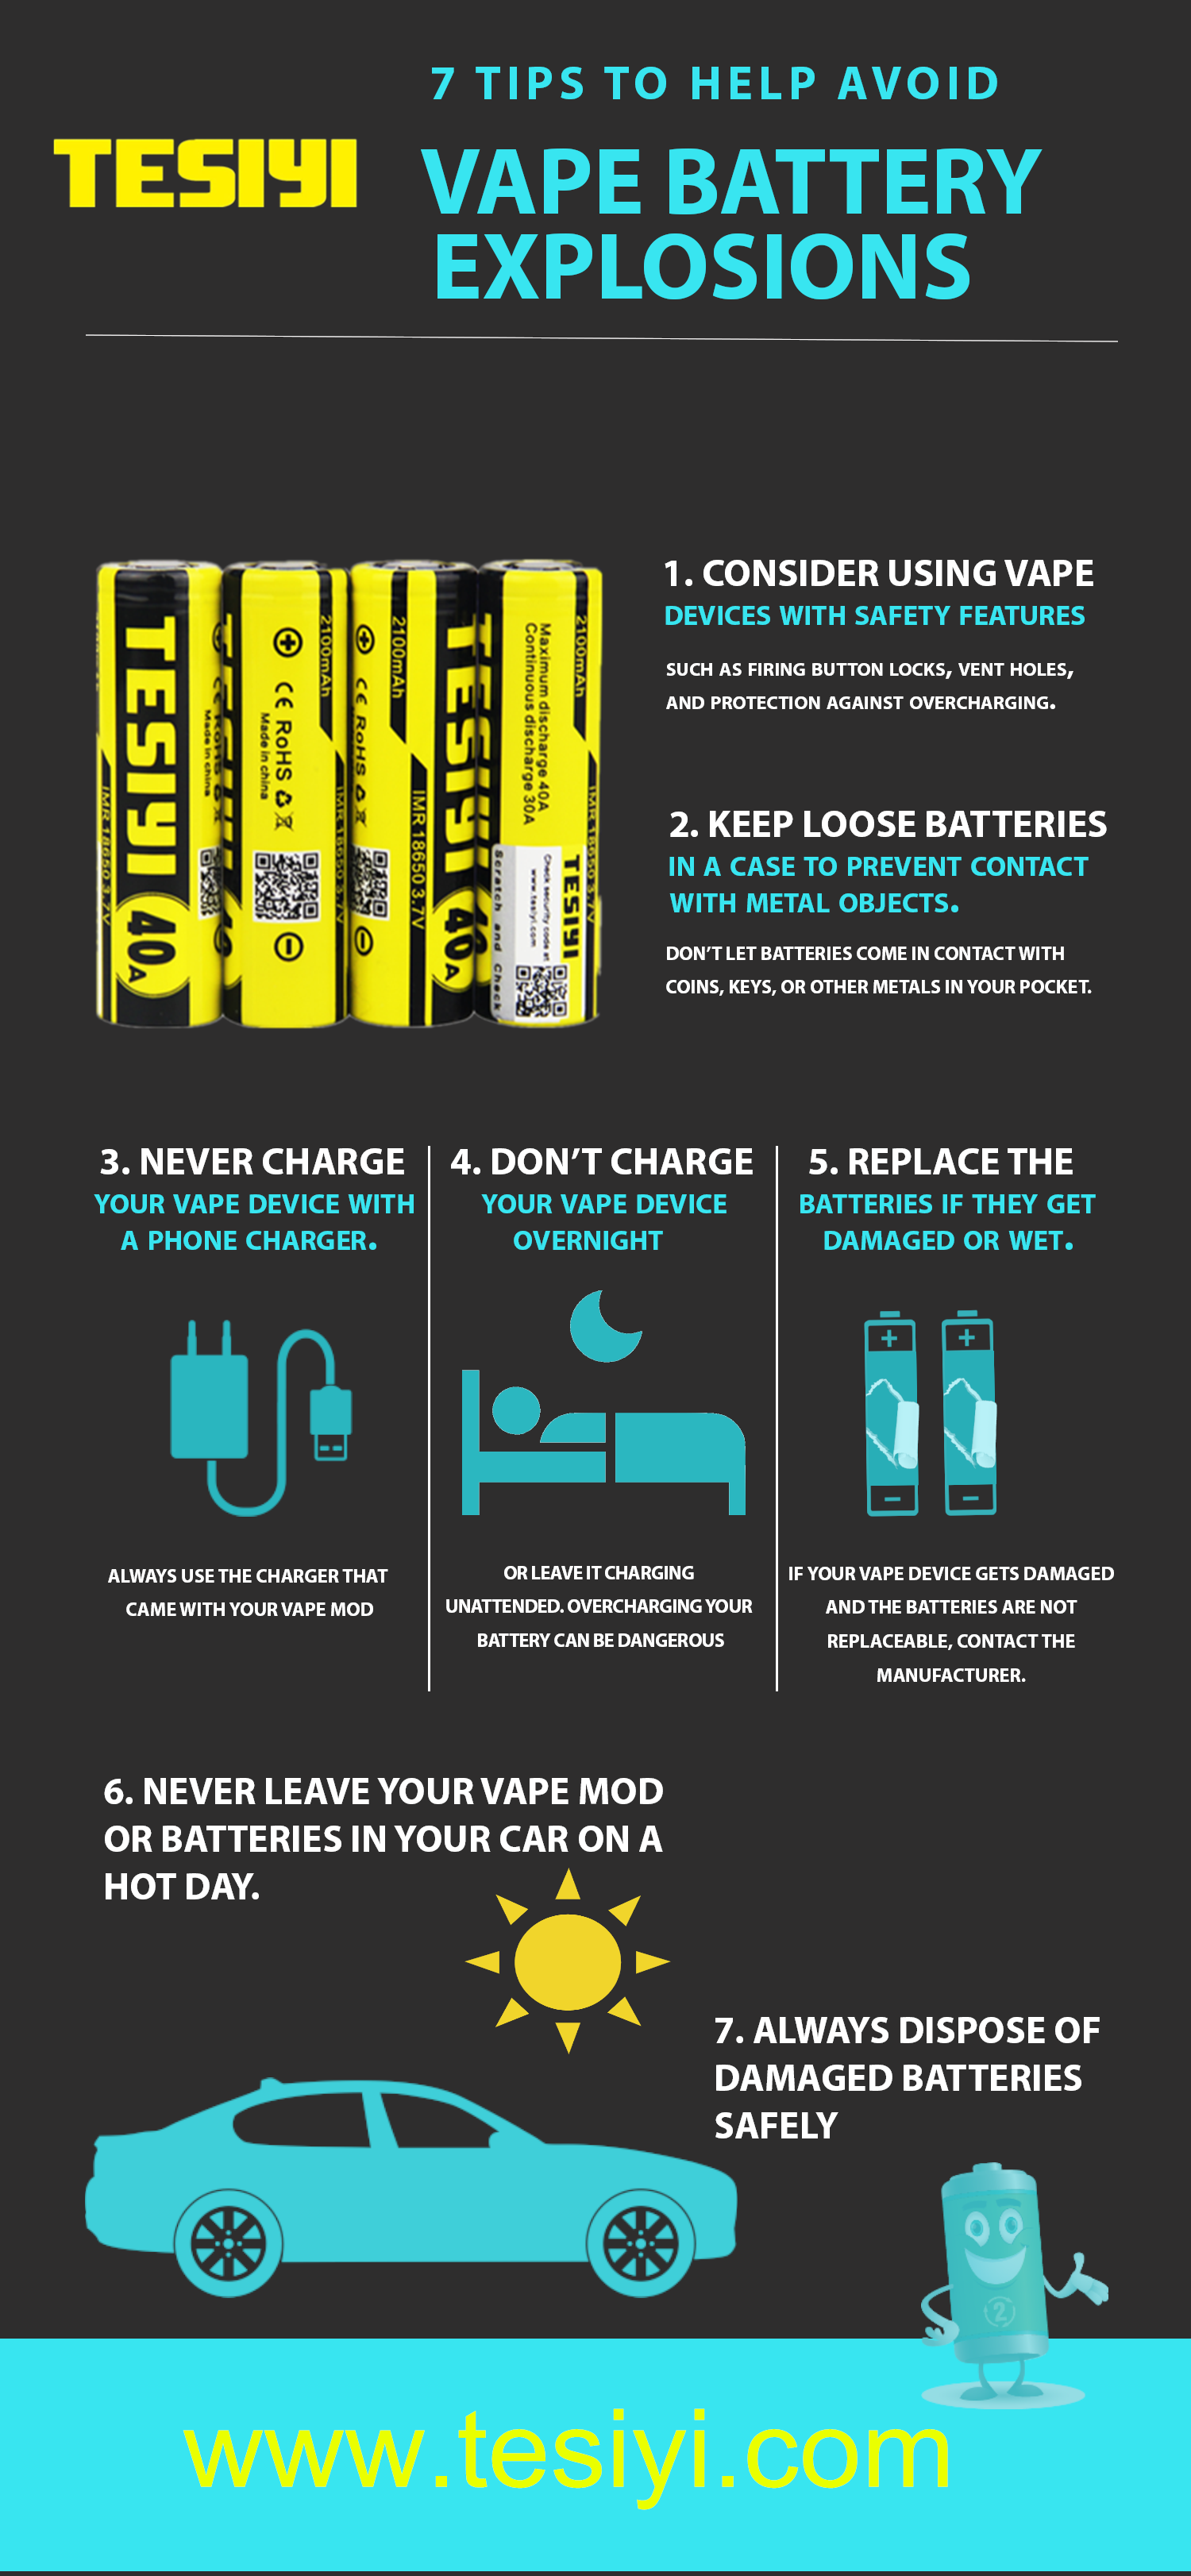 7_TIPS_TO_HELP_AVOID_VAPE_BATTERY_EXPLOSION.png